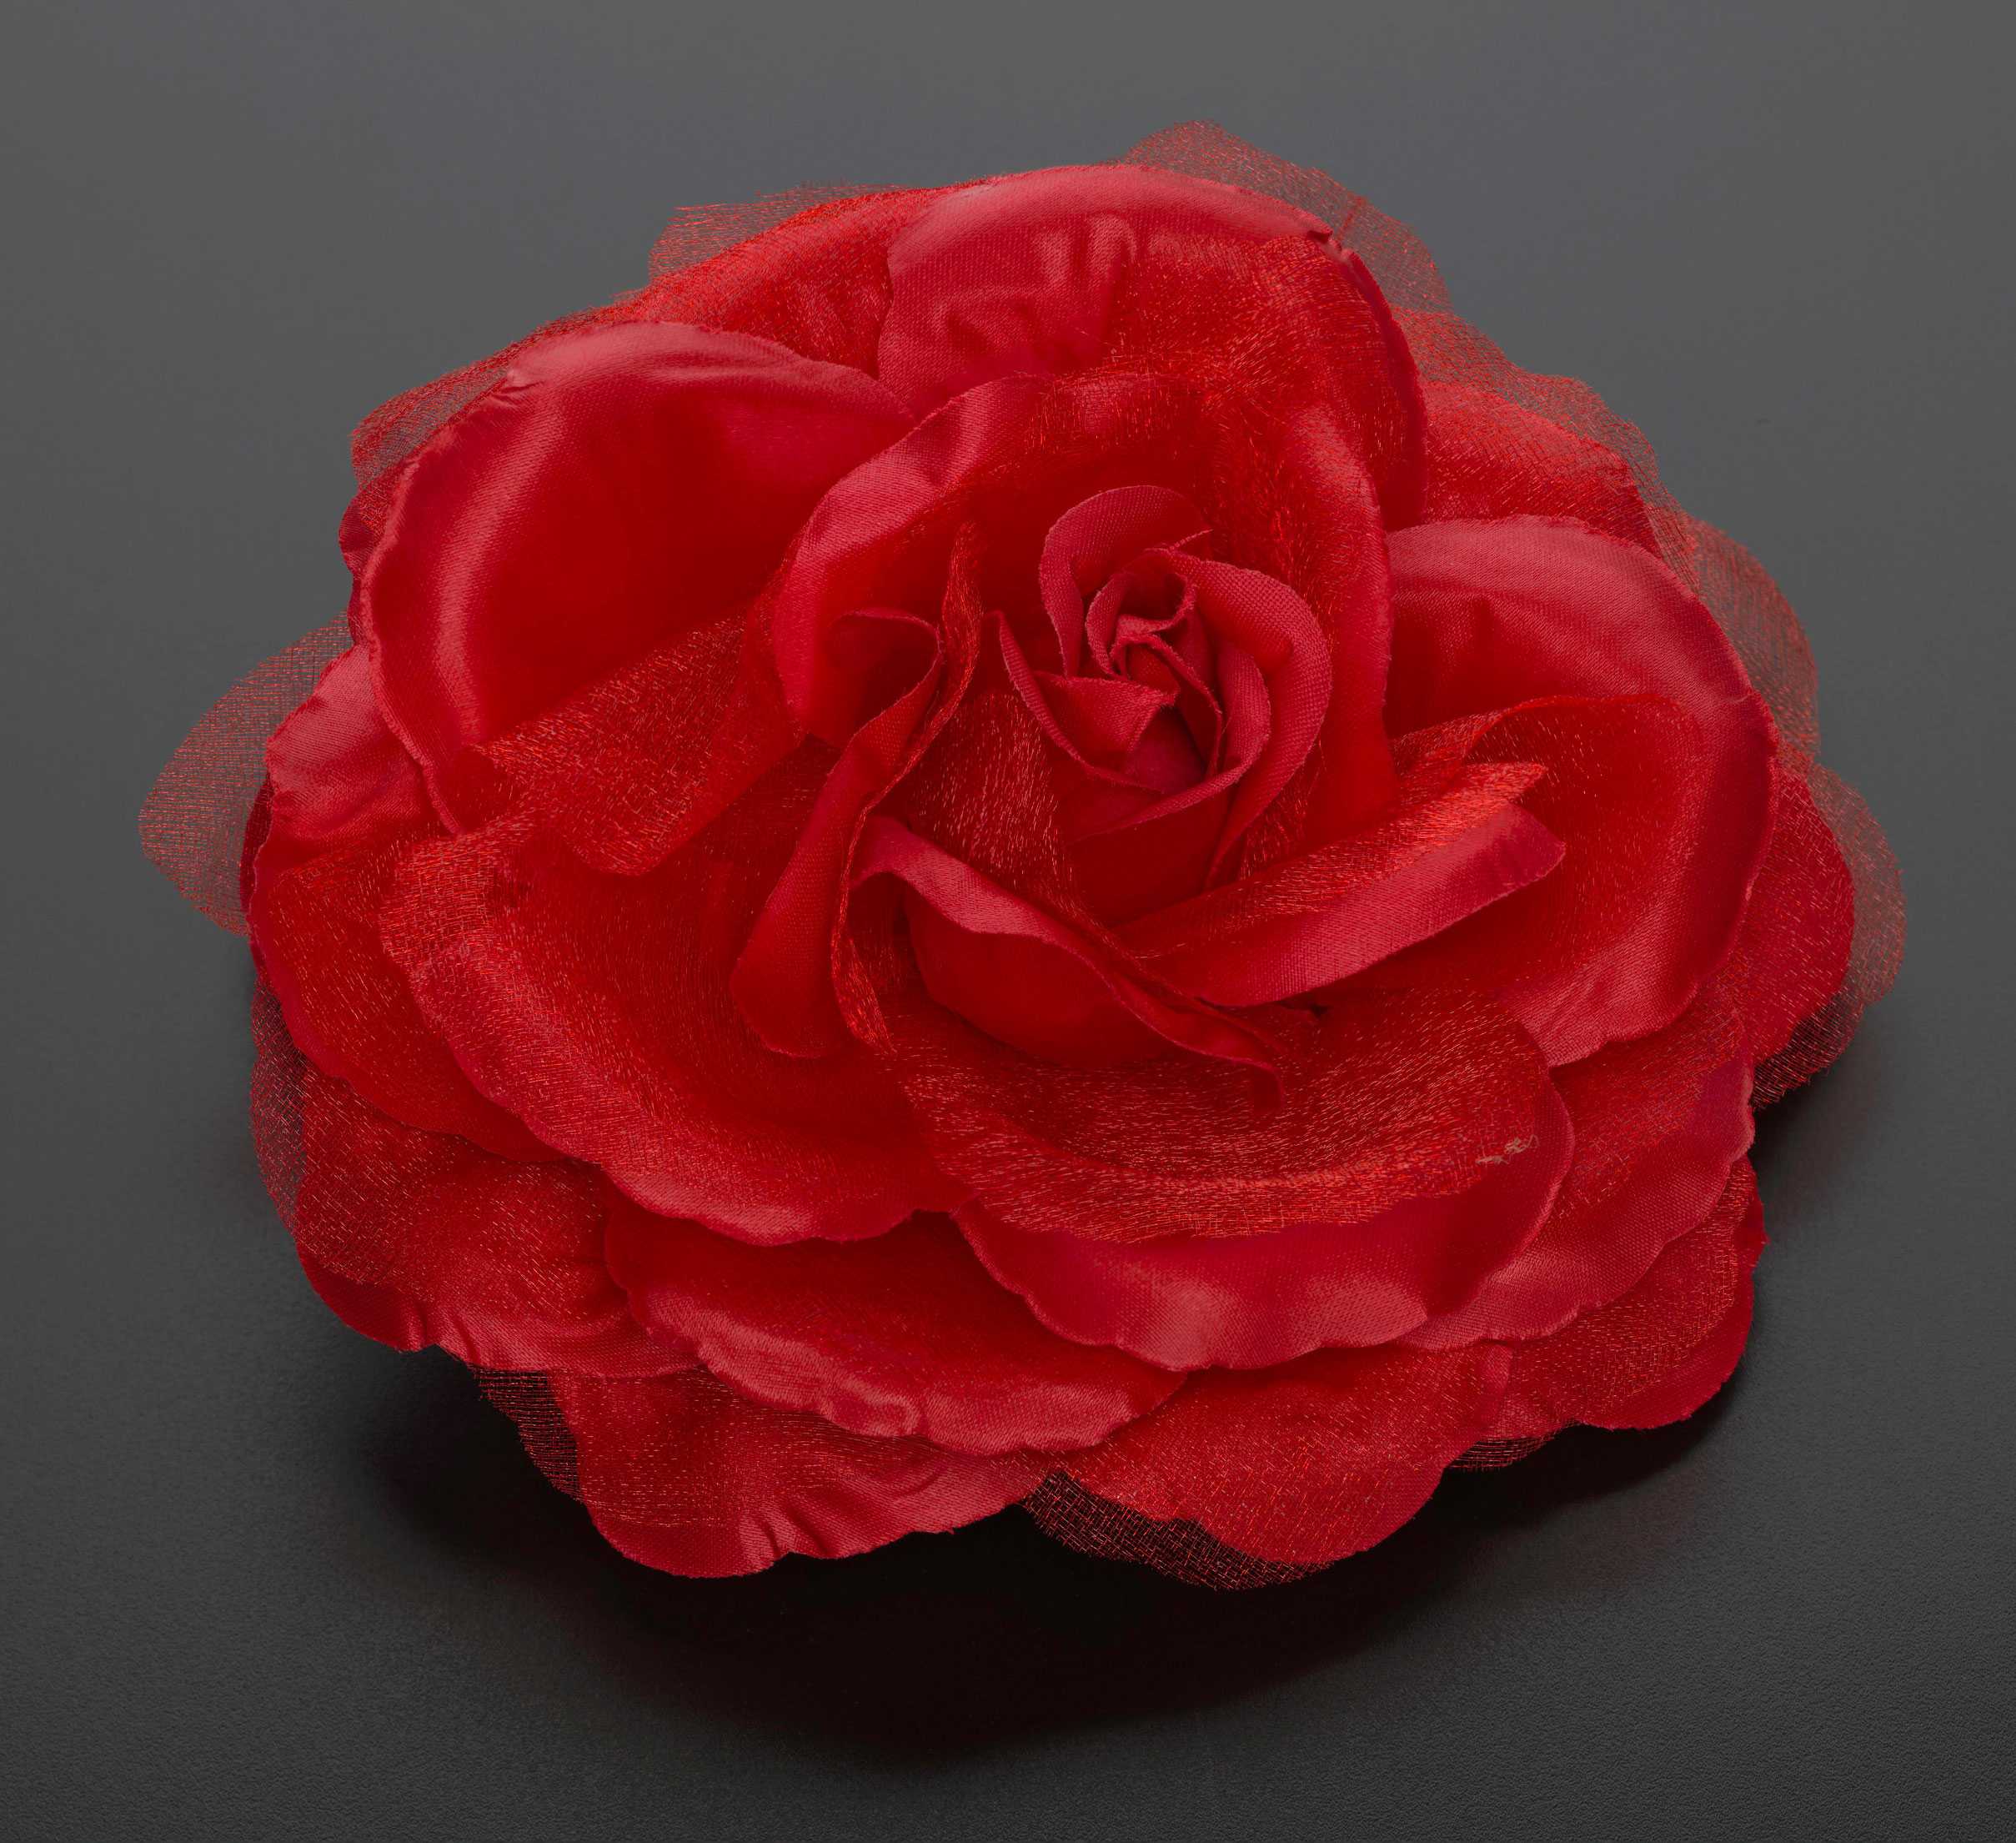 A bright red silk rose with many petals. The rose looks realistic.